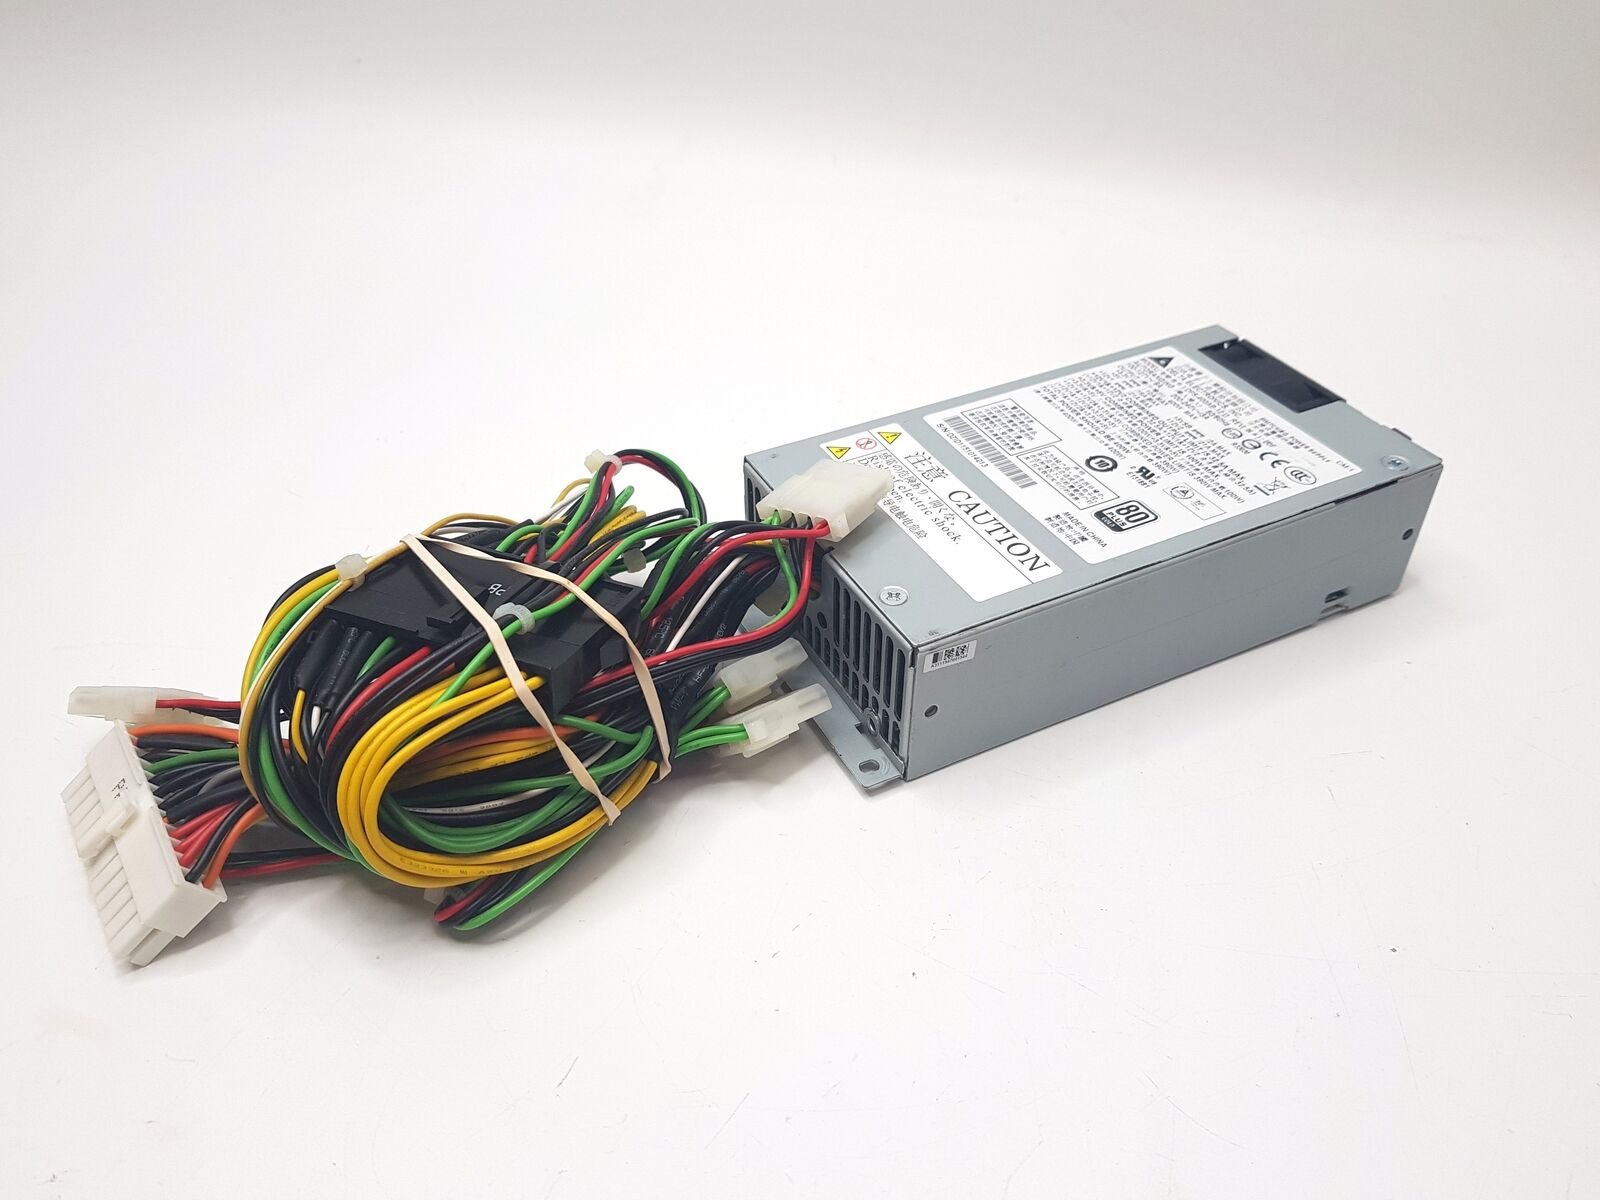 Delta Electronics 400w Switching Power Supply DPS-400AB-12D